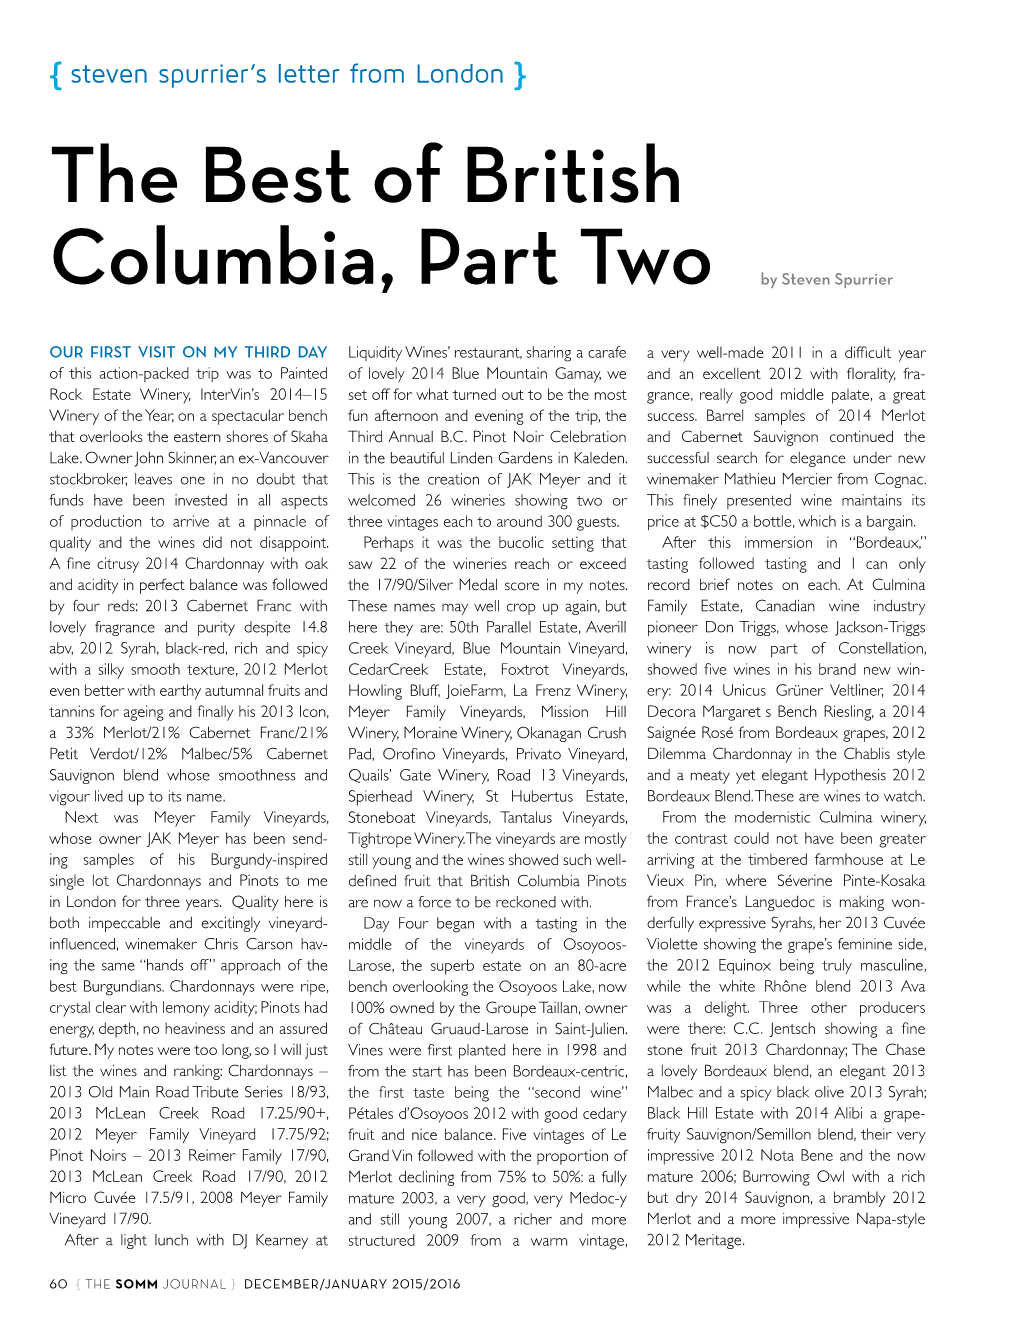 The Best of British Columbia, Part Two by Steven Spurrier